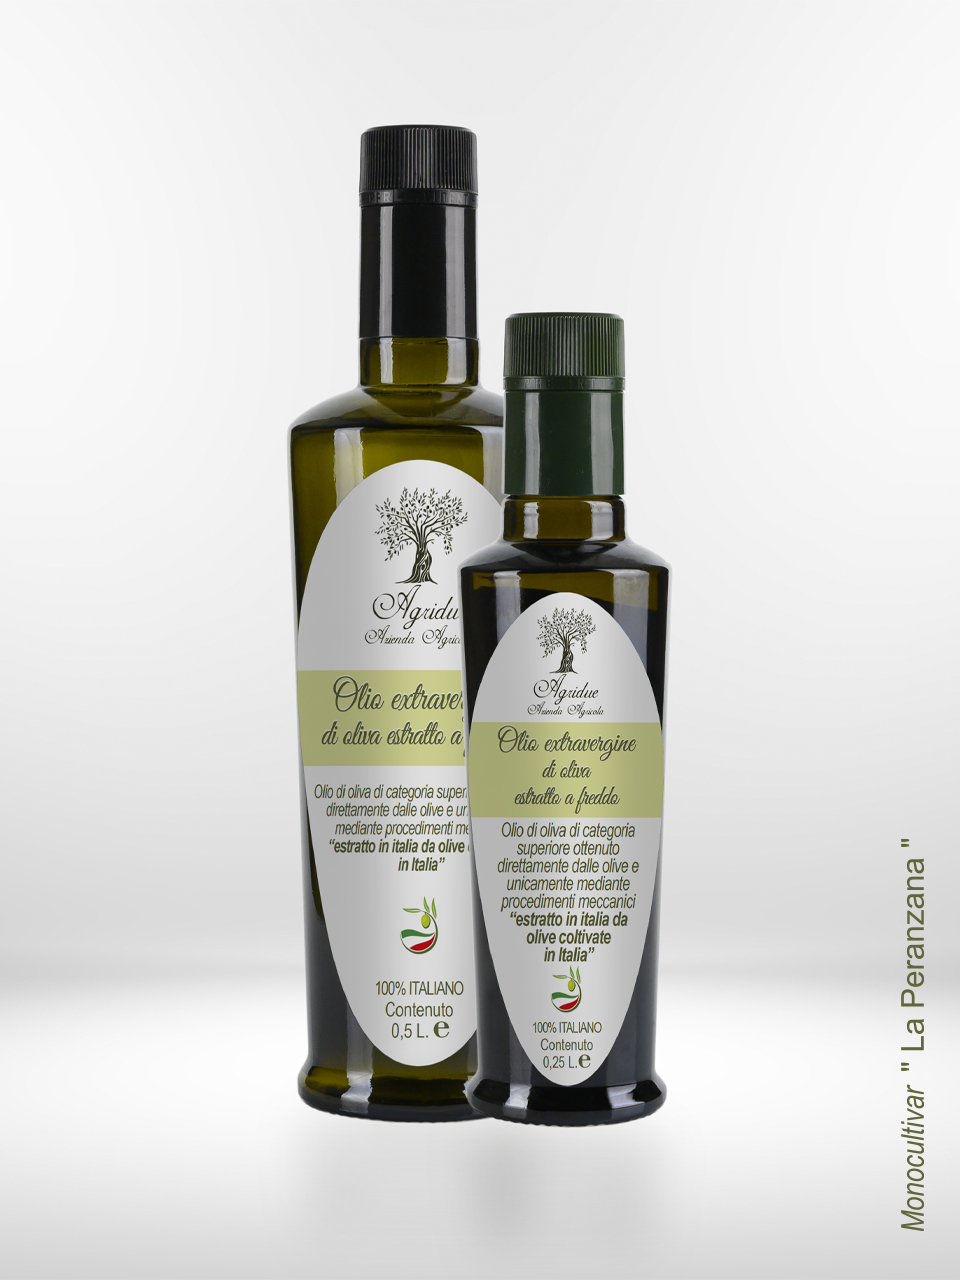 Two bottles of olive oil on a white background. Monovarietal oil of the plant type.